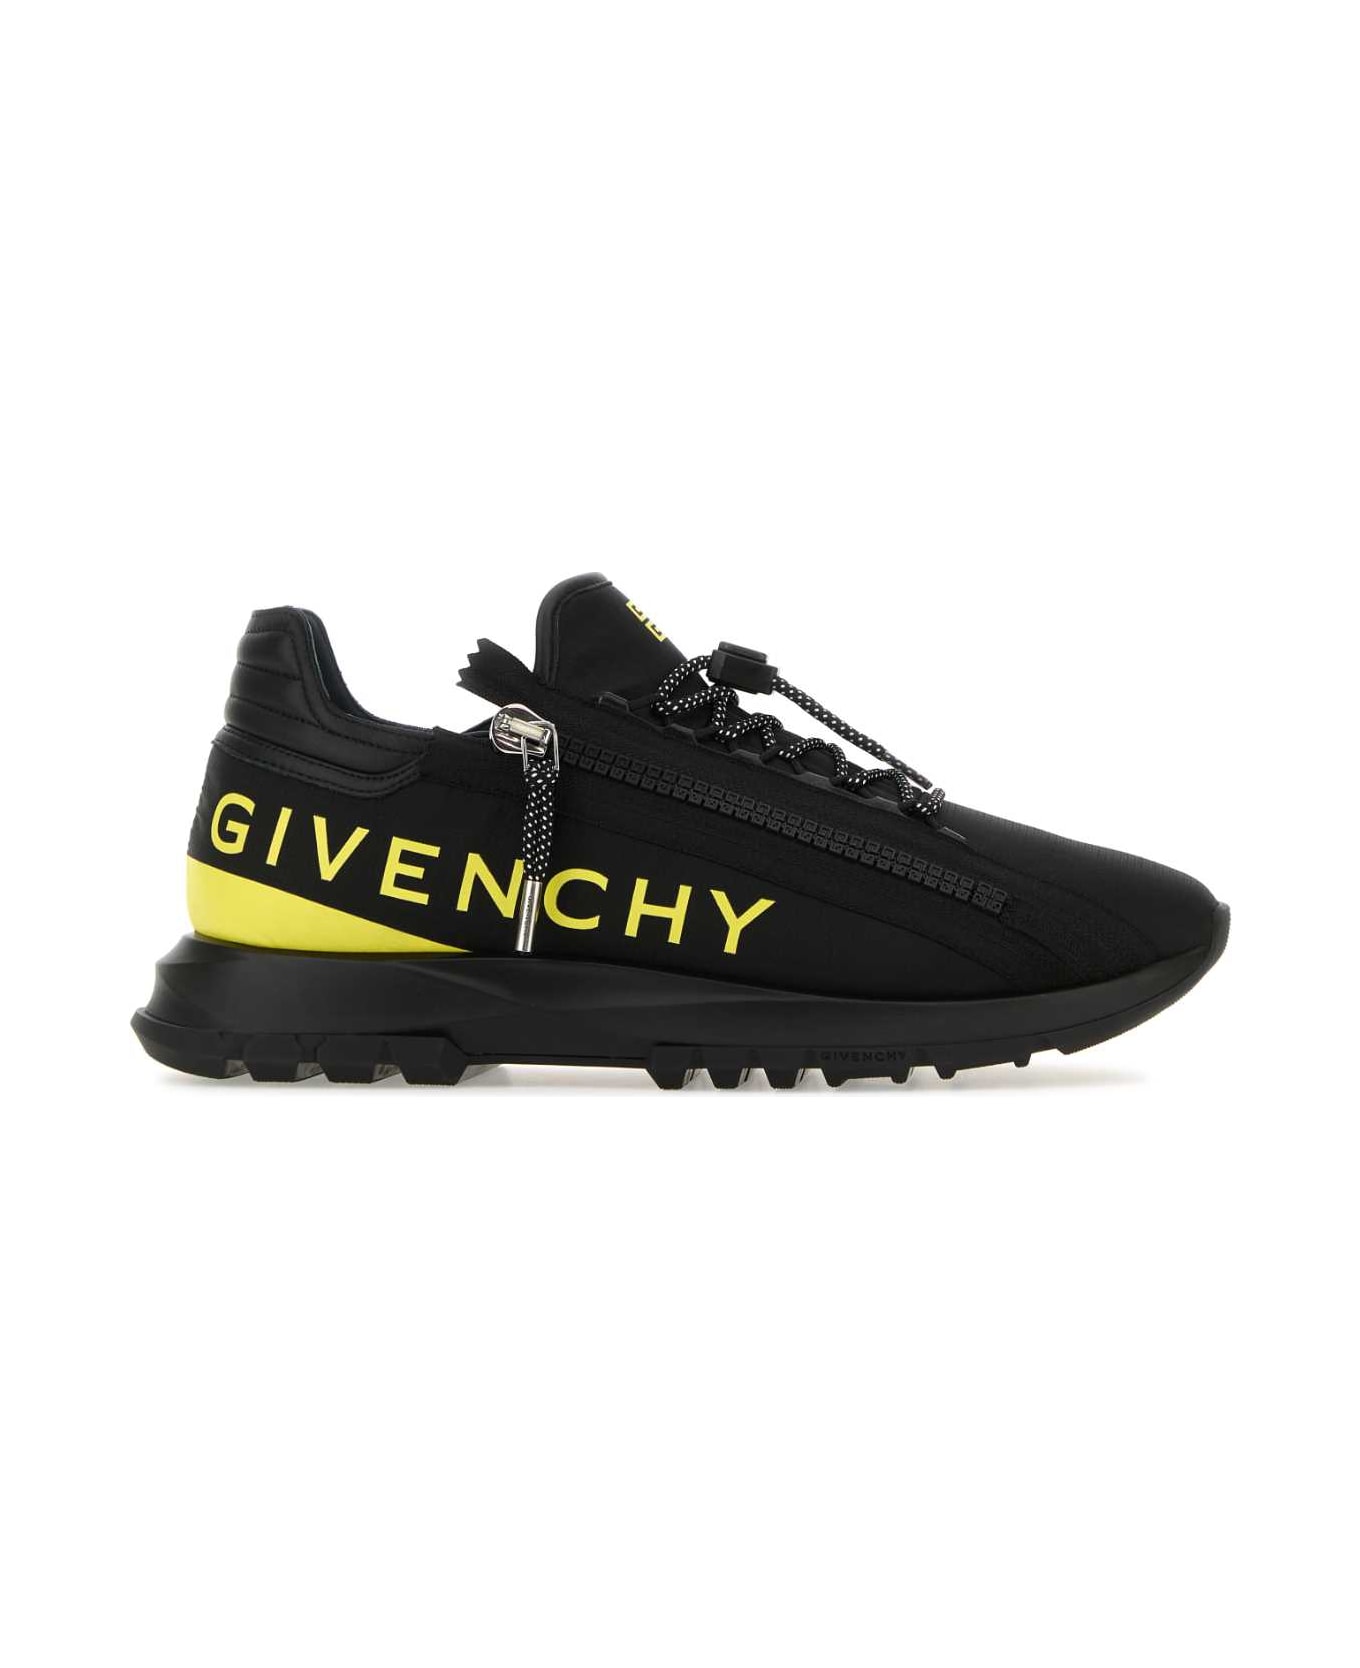 Givenchy Black Fabric Spectre Sneakers - BLACKYELLOW スニーカー